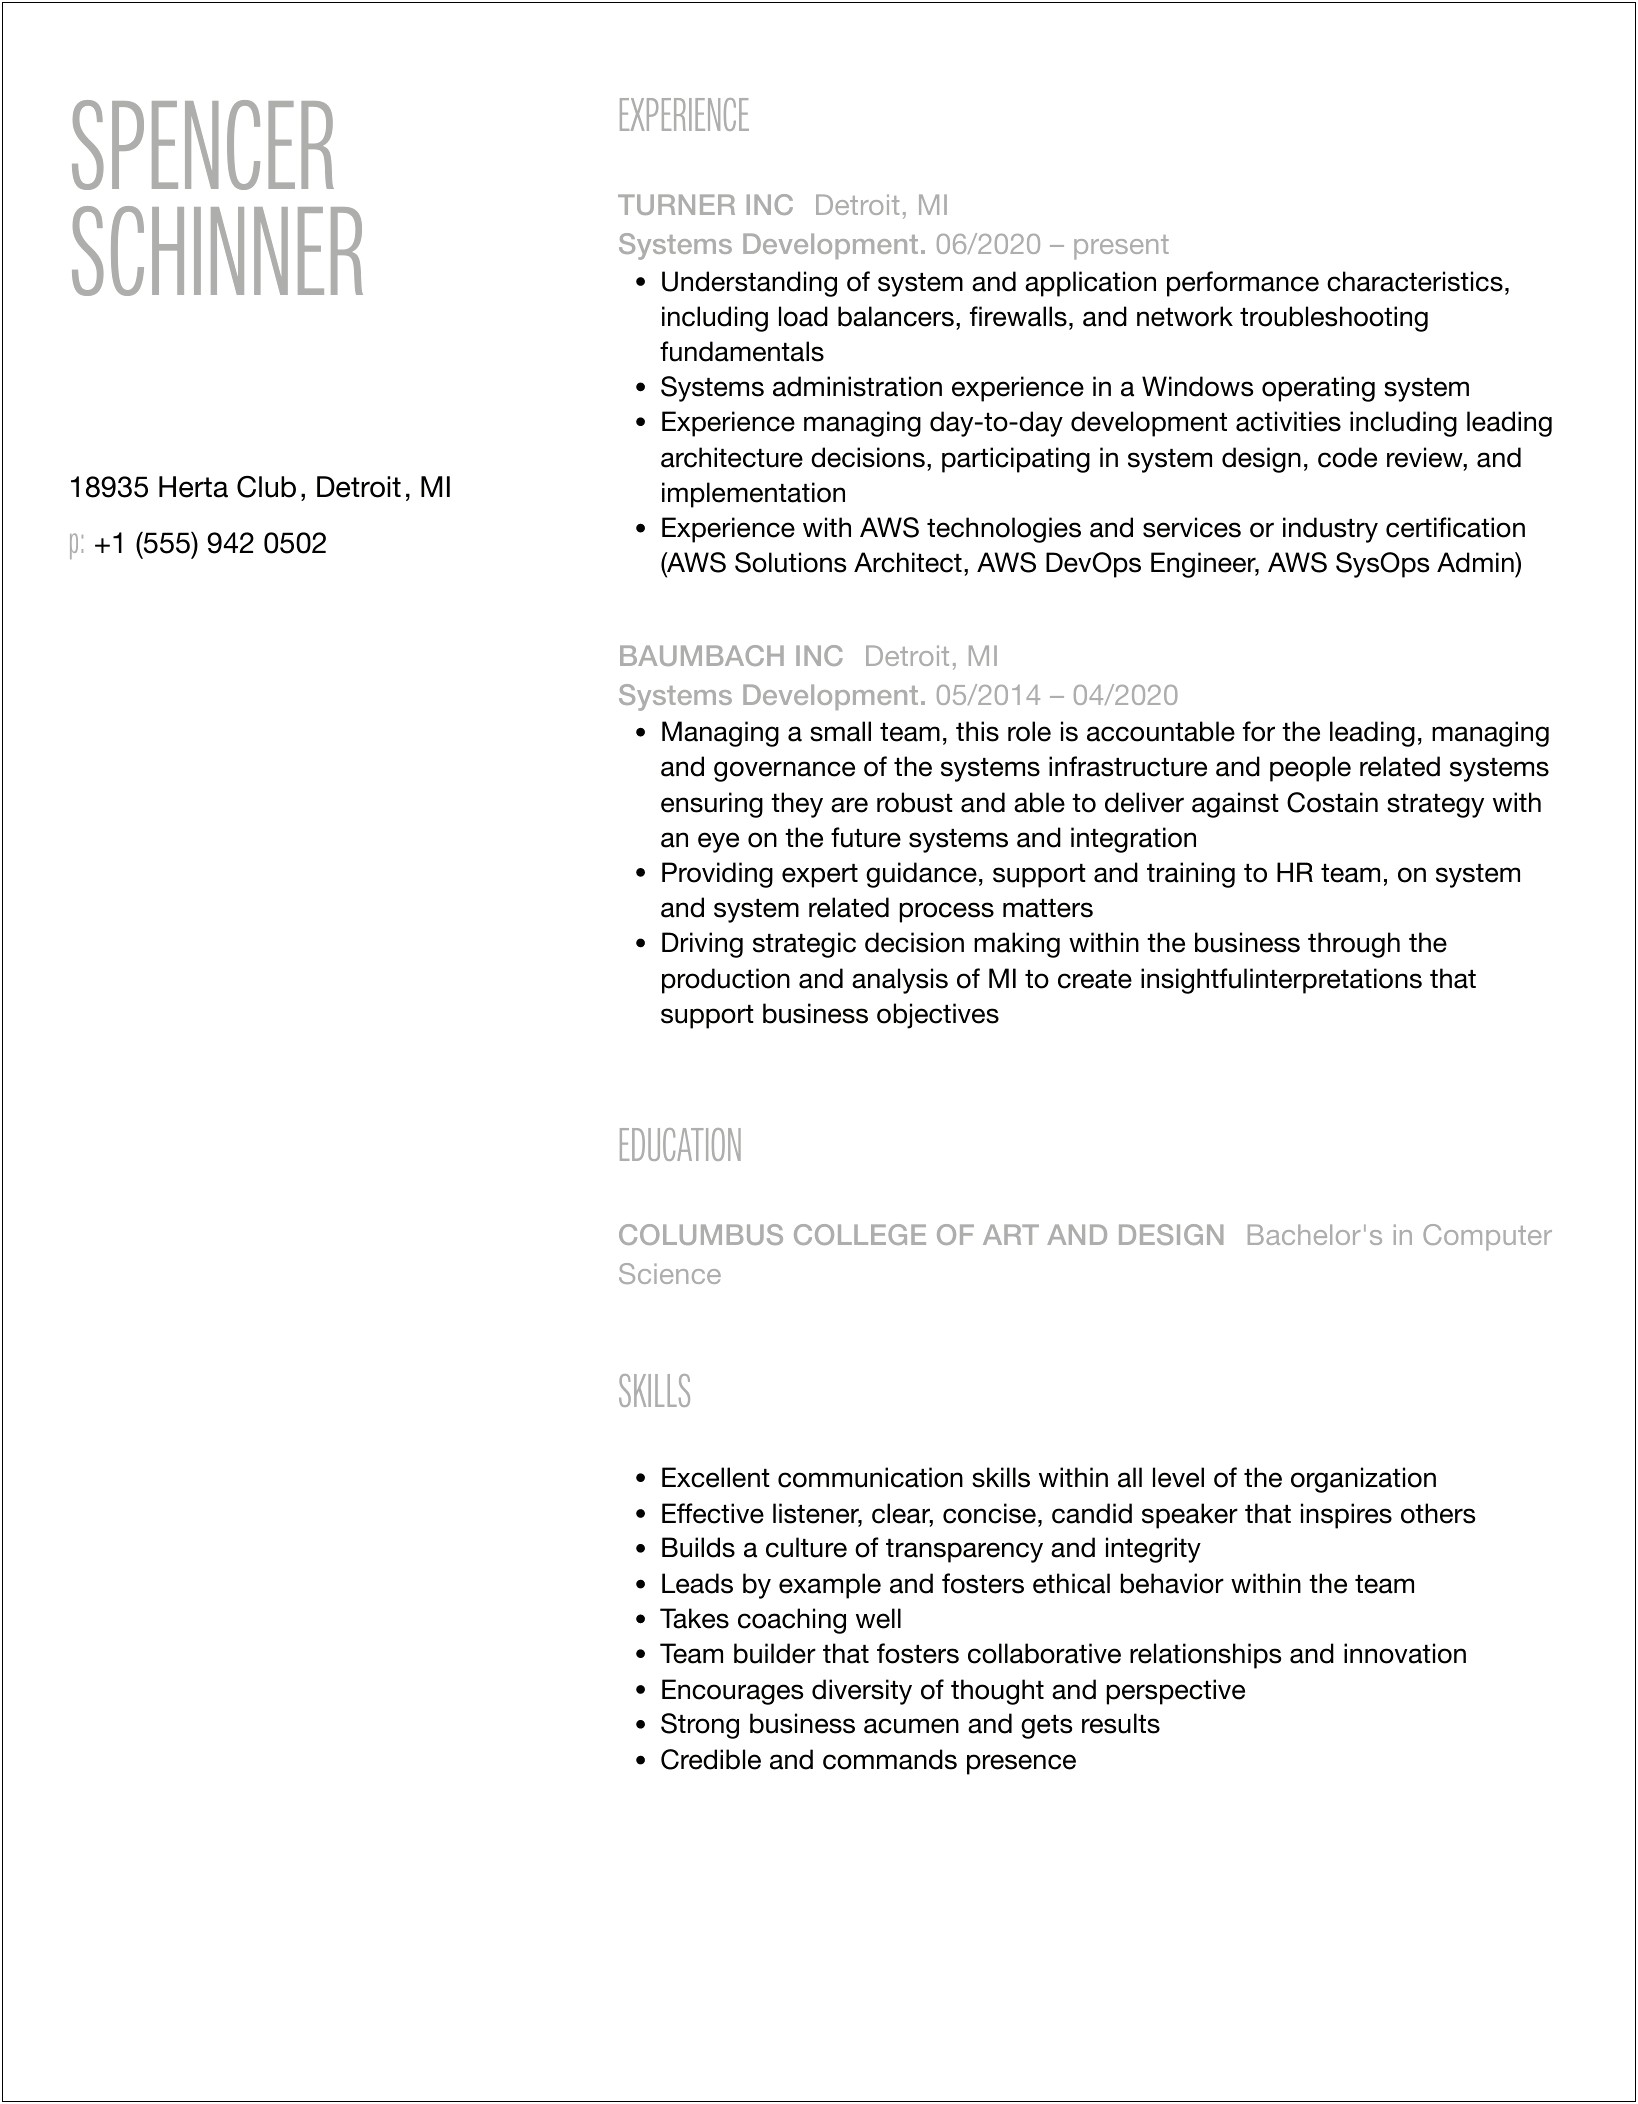 Software Development Life Cycle Experience Resume